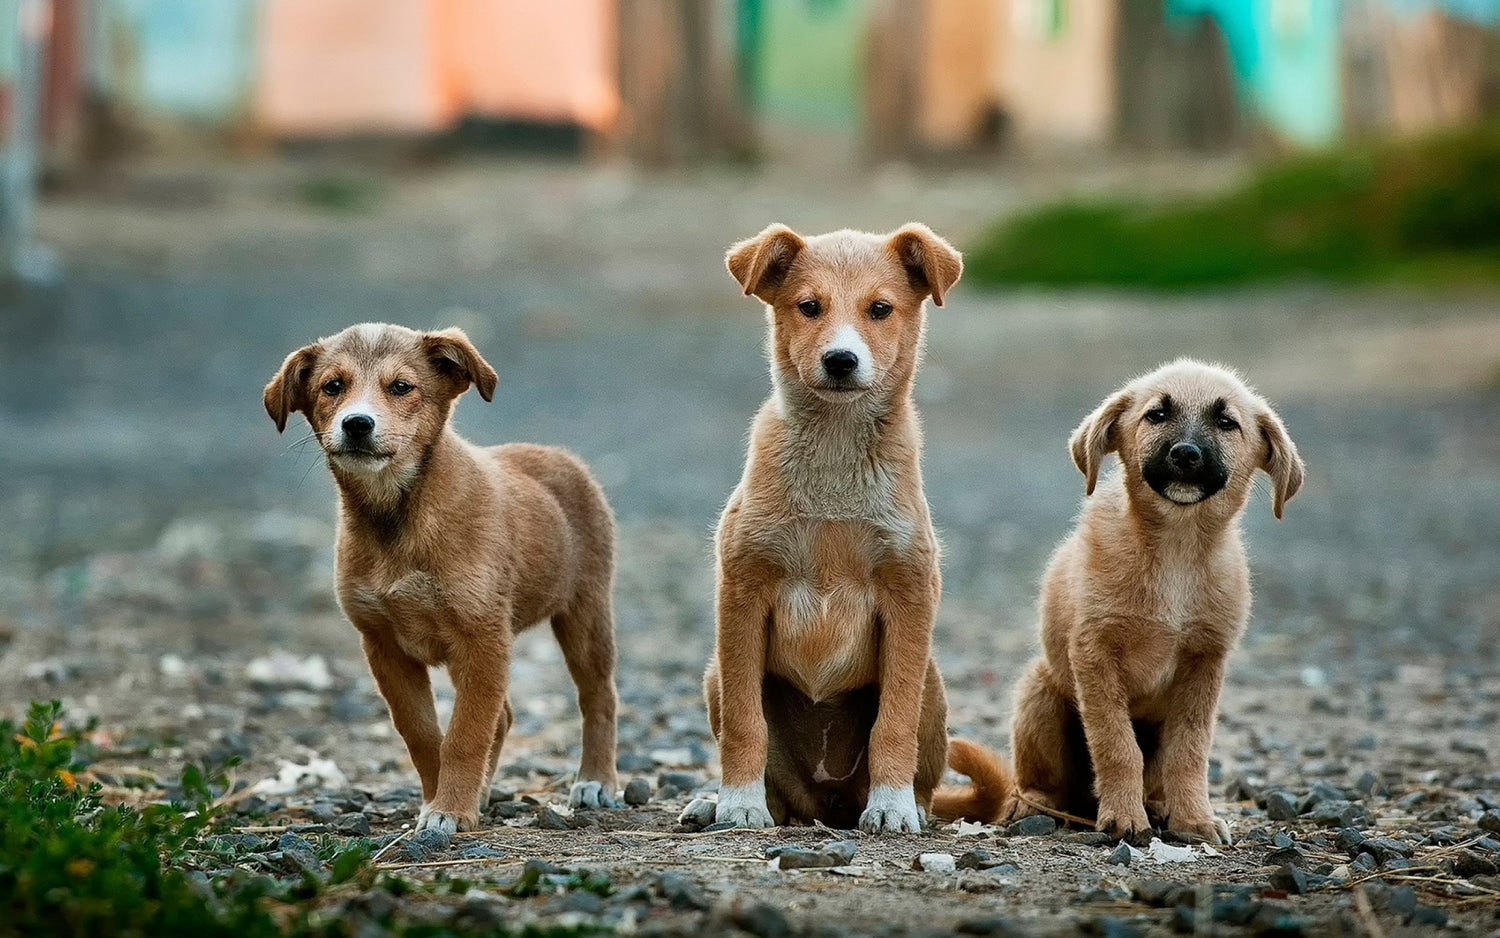 Three young, beige puppies sitting on a cobblestone road look up to the camera.